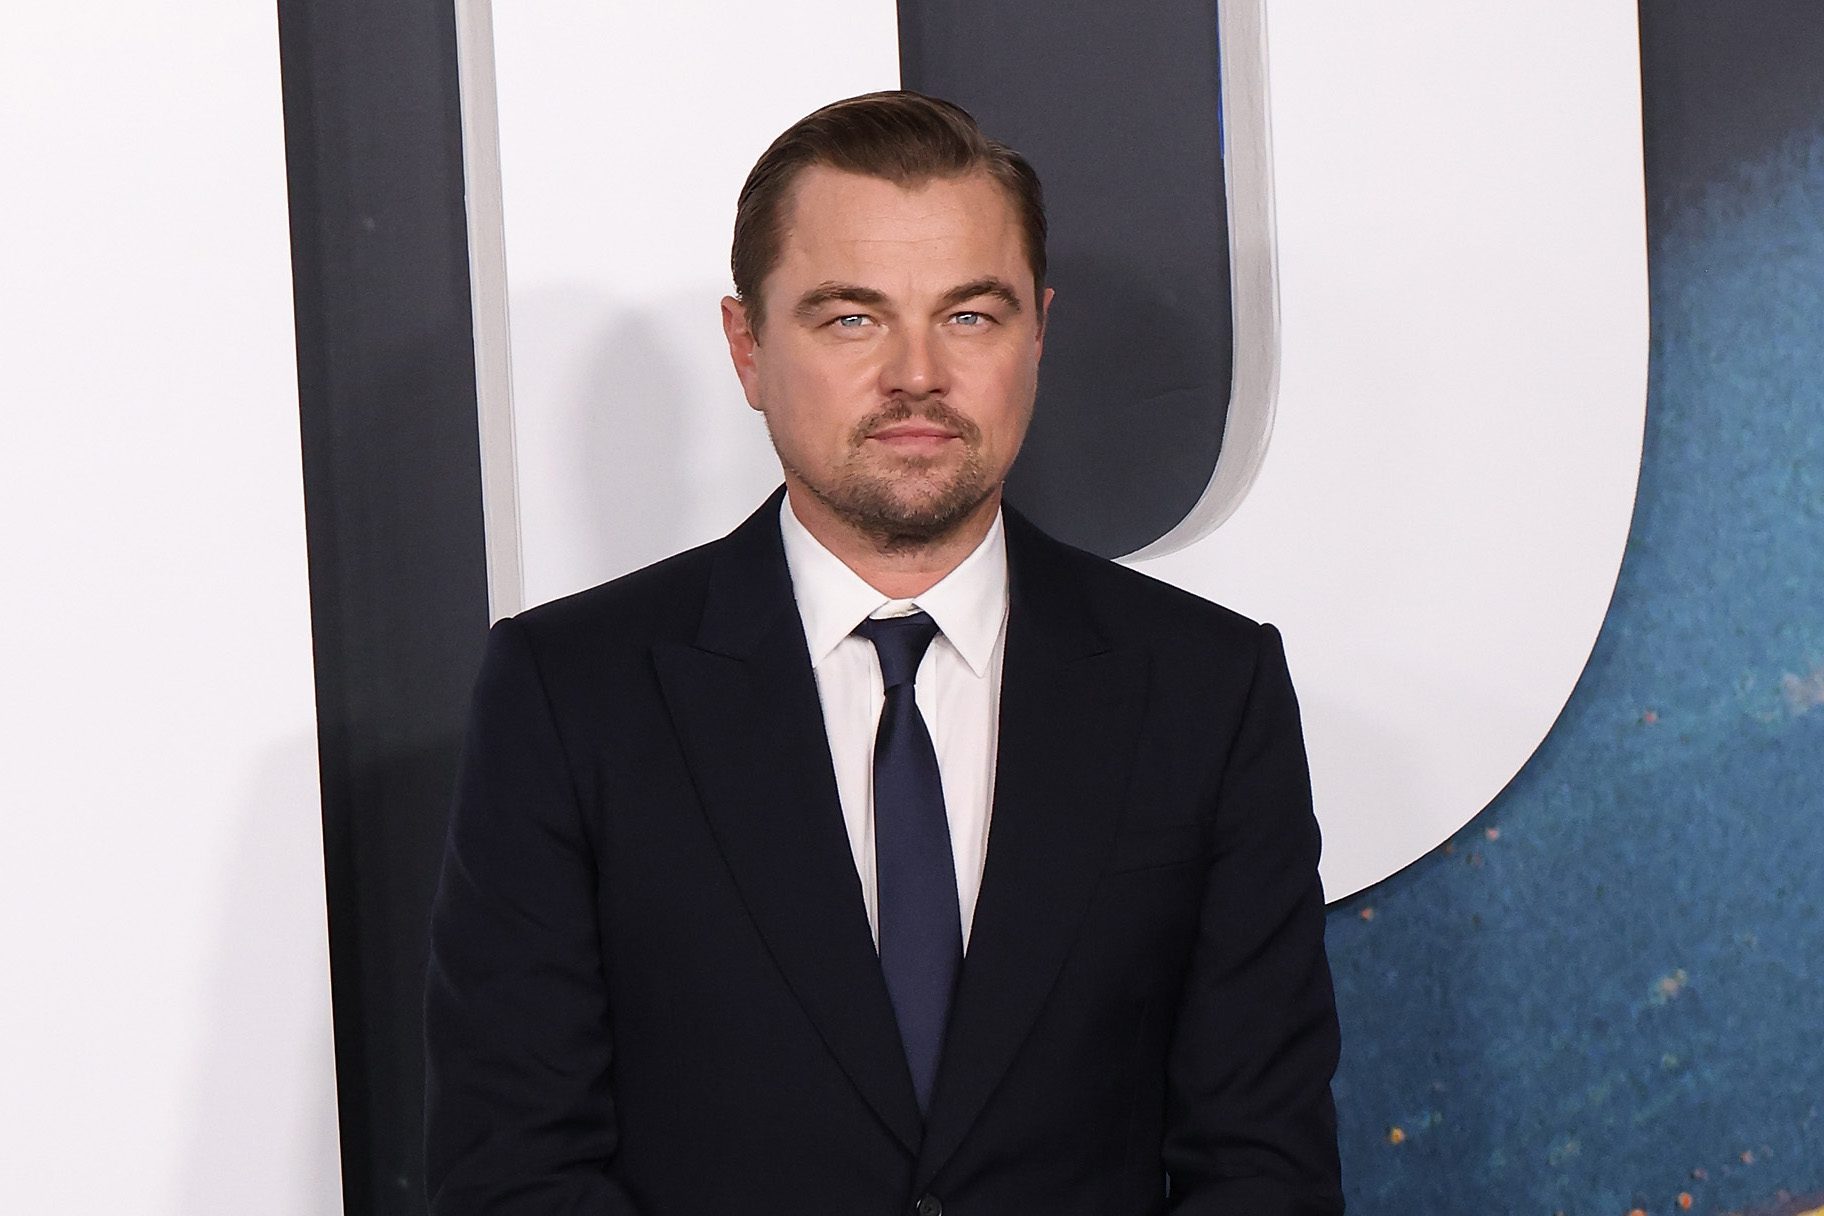 the-internet-is-divided-over-leonardo-dicaprio-allegedly-dating-a-19-year-old